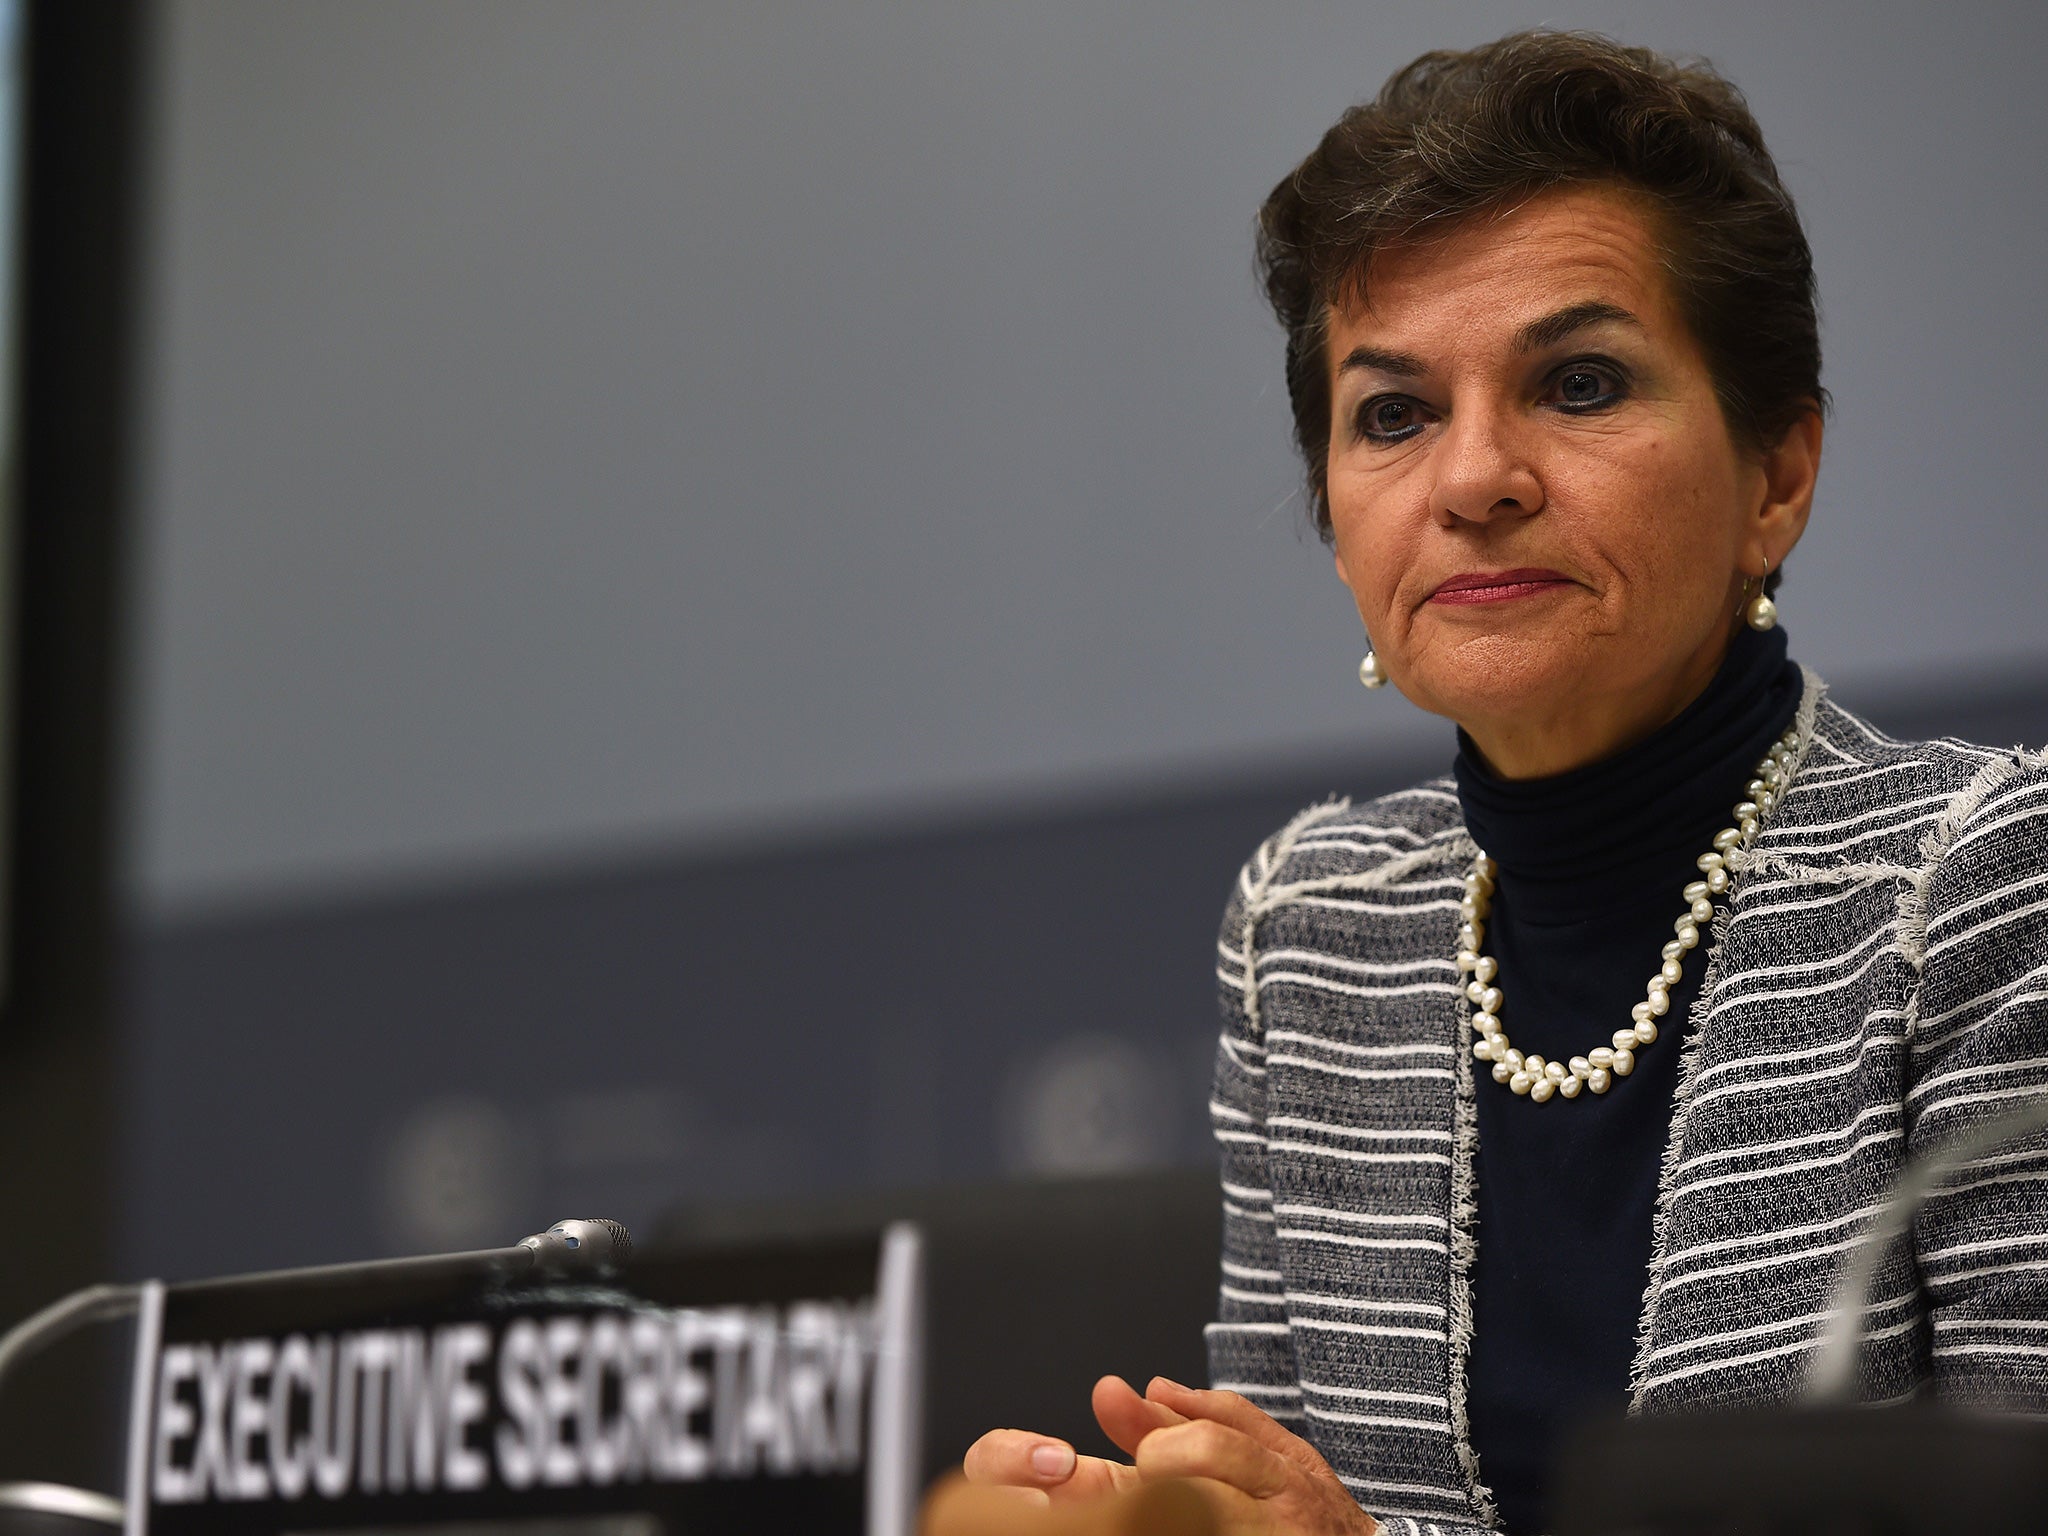 Christiana Figueres is increasingly confident that difficulties in tackling climate change will be overcome